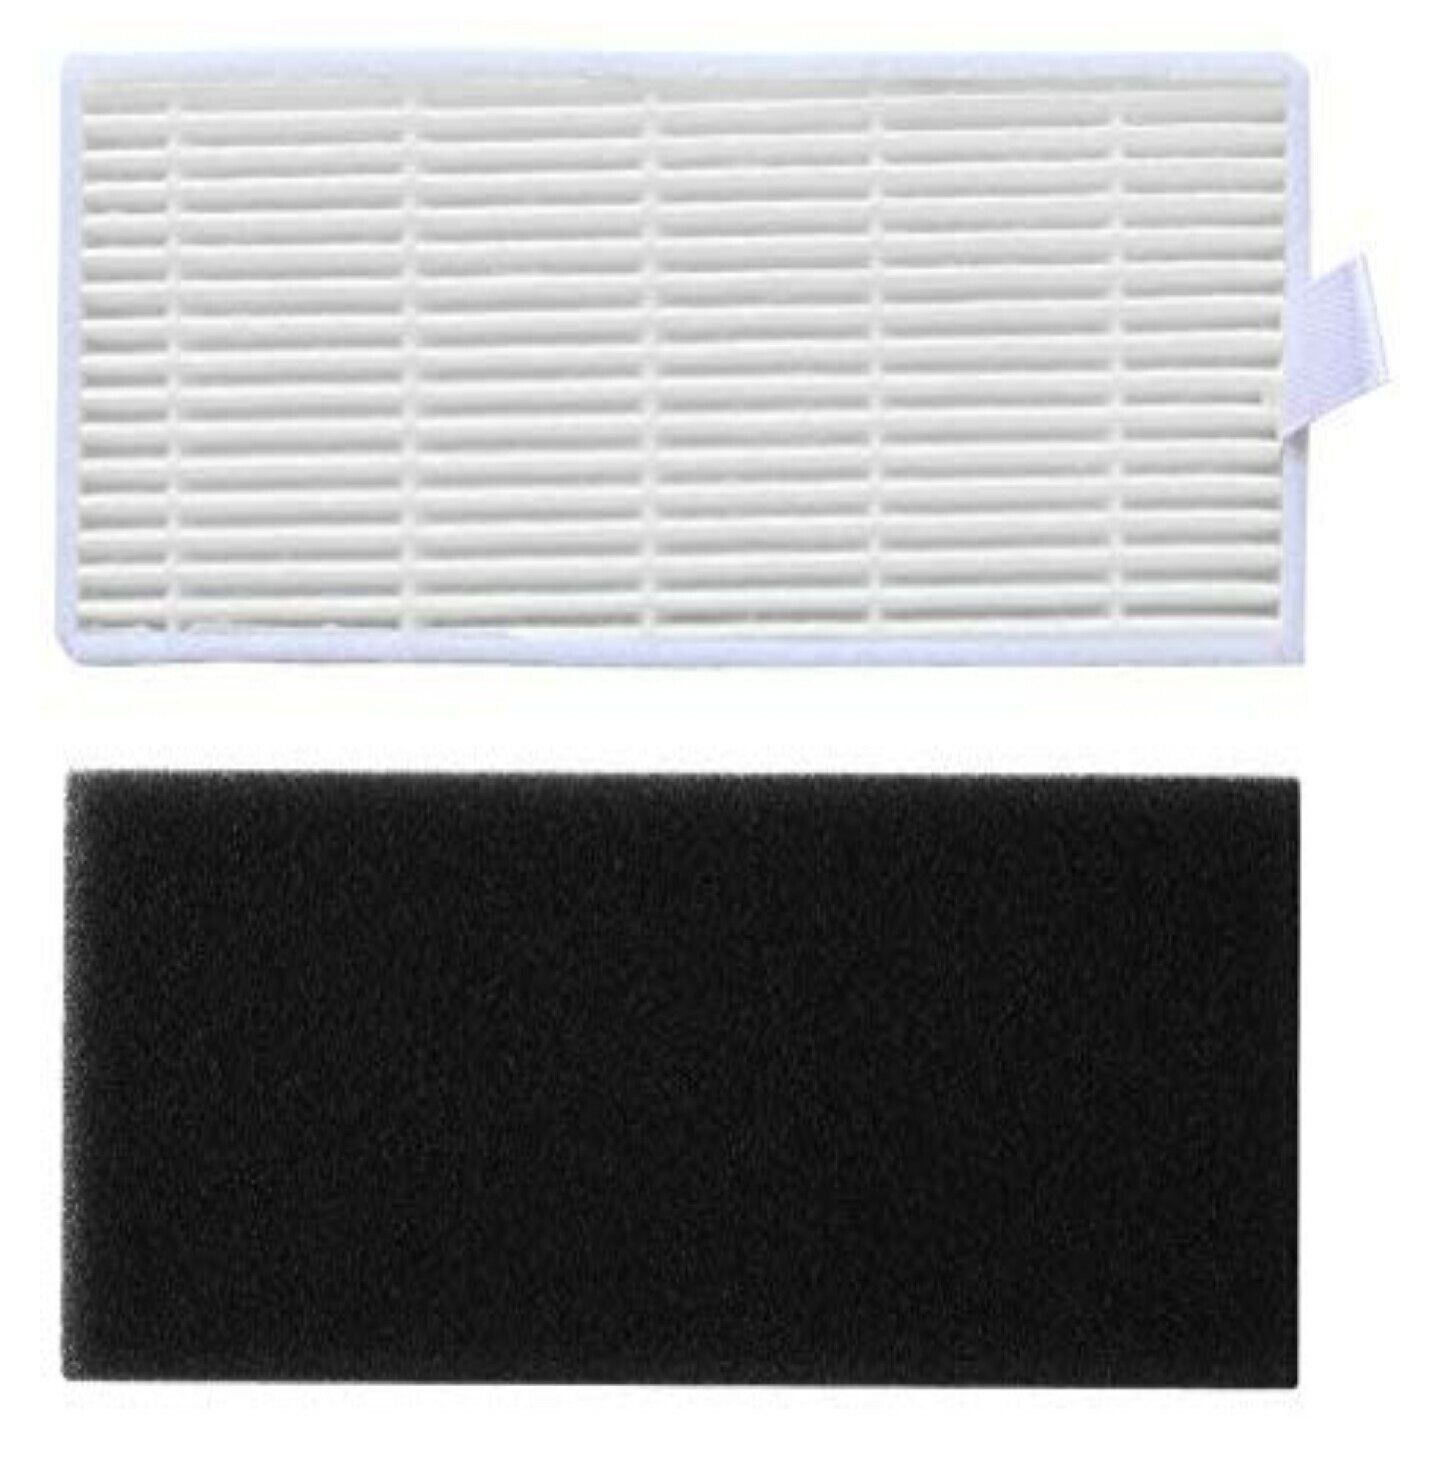 Filters 10-Pack Replacement High Filter & Sponge Filter Kit with A6